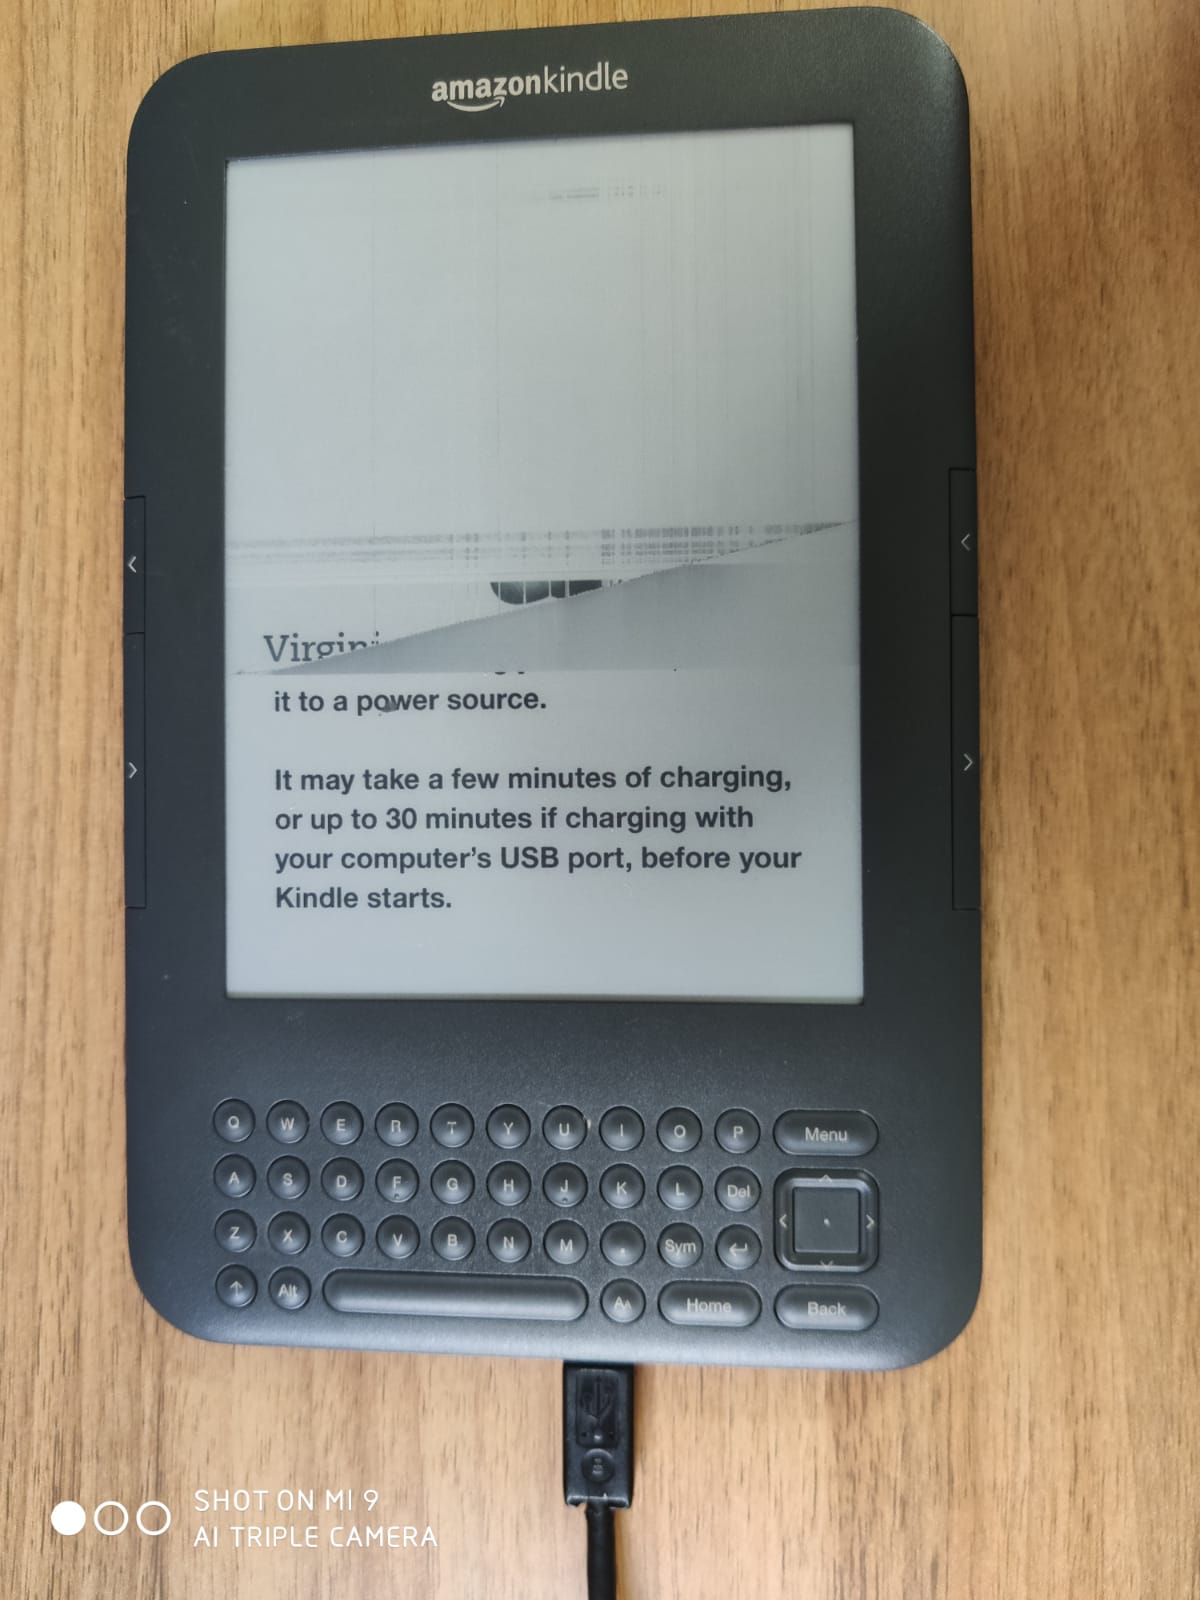 I have a Kindle keyboard (Model D00901). It will not turn on, despite being  on the charger for hours. I tried the hard reboot (sliding the power switch  and holding for 20+